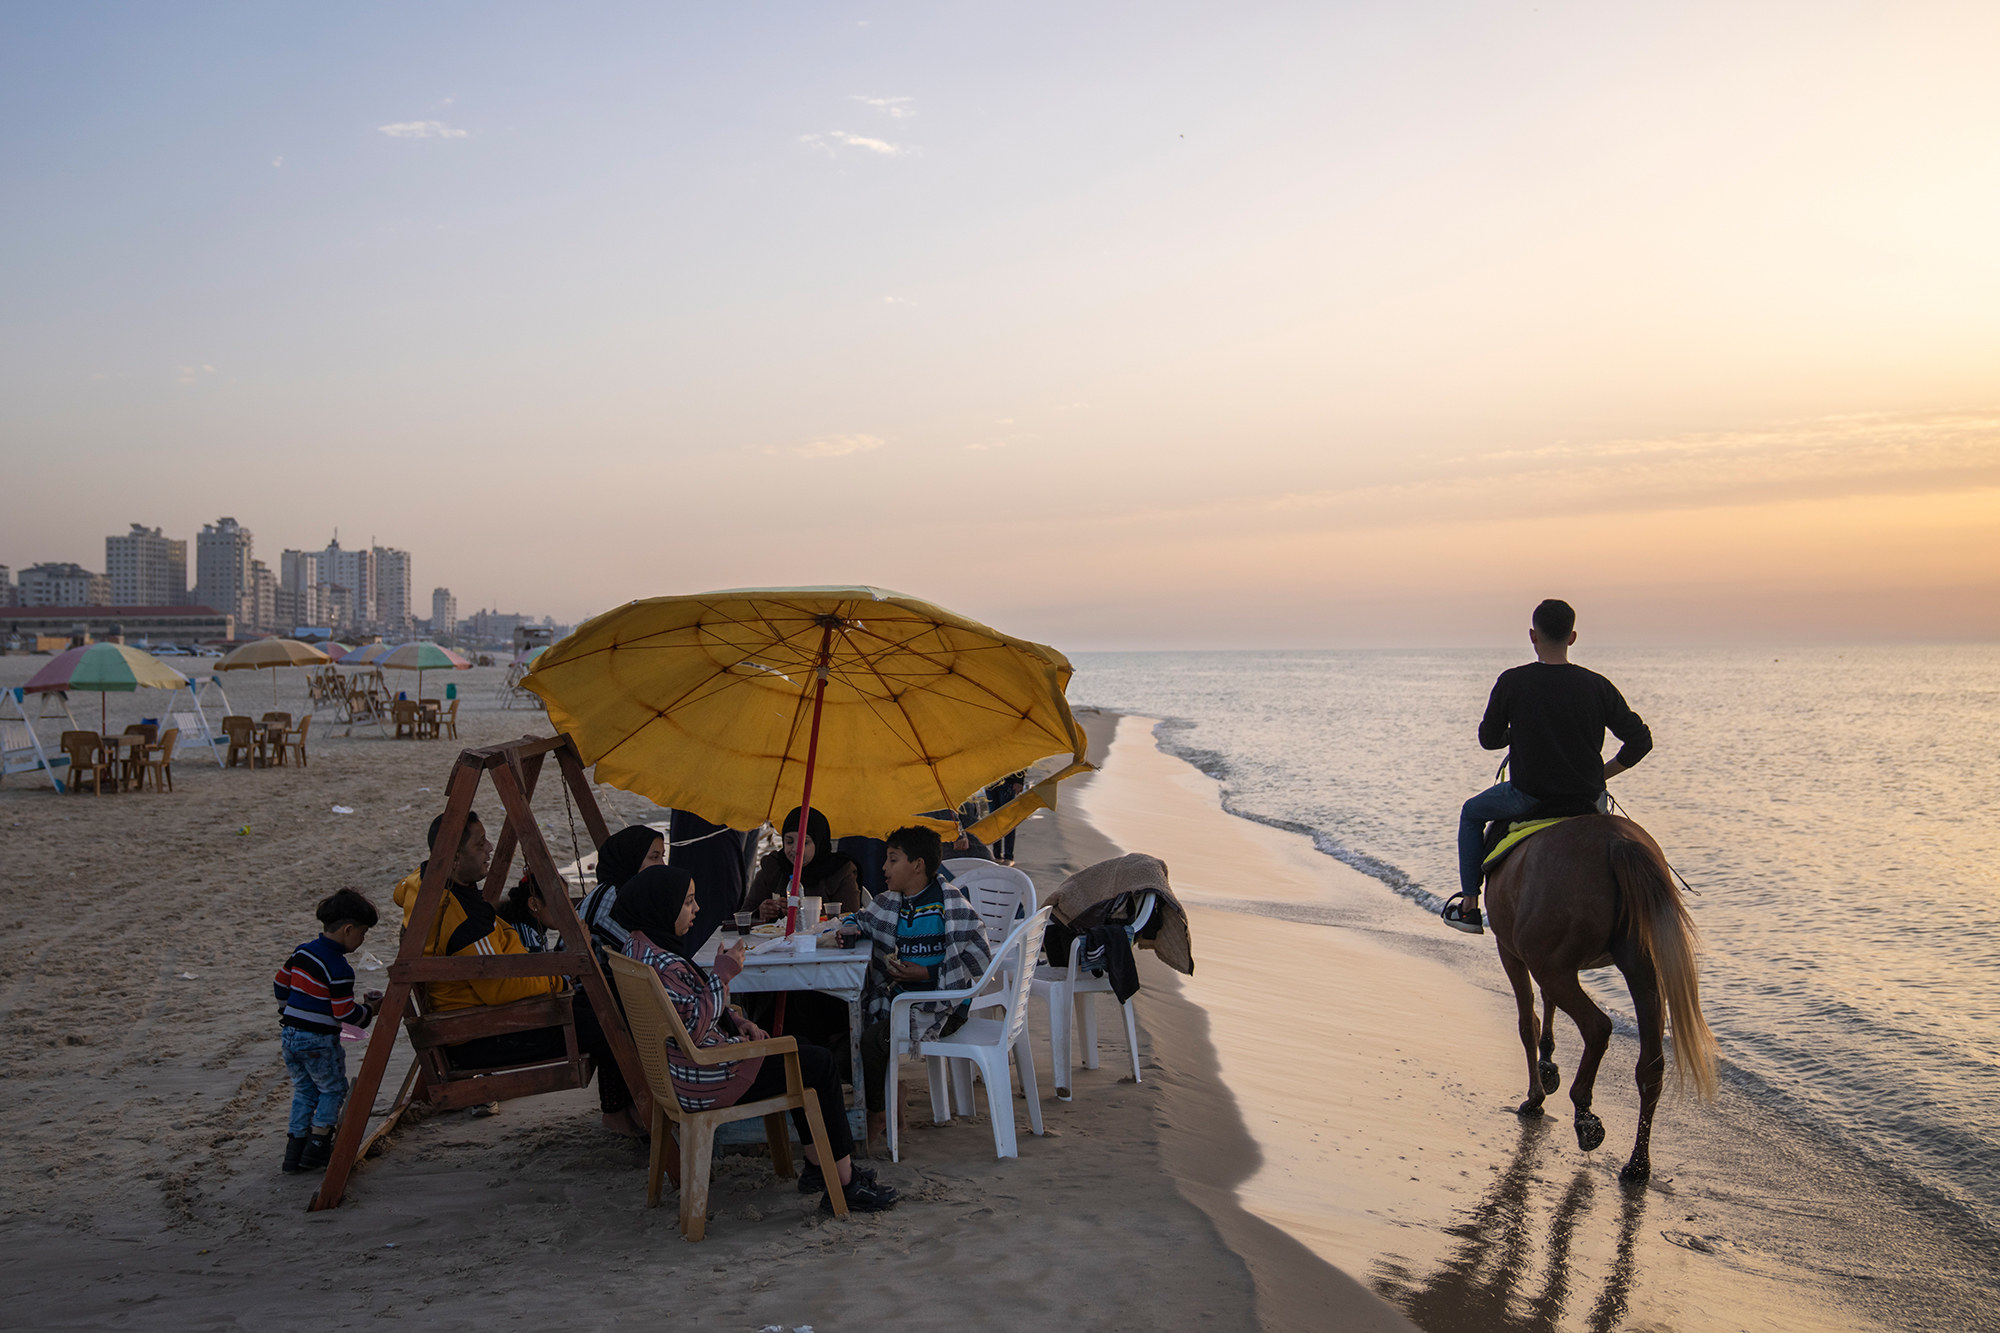 A person rides a horse alongside a shore next to a family gathered around a plastic table and enjoying a meal, seated in chairs and a swinging bench under a big yellow umbrella